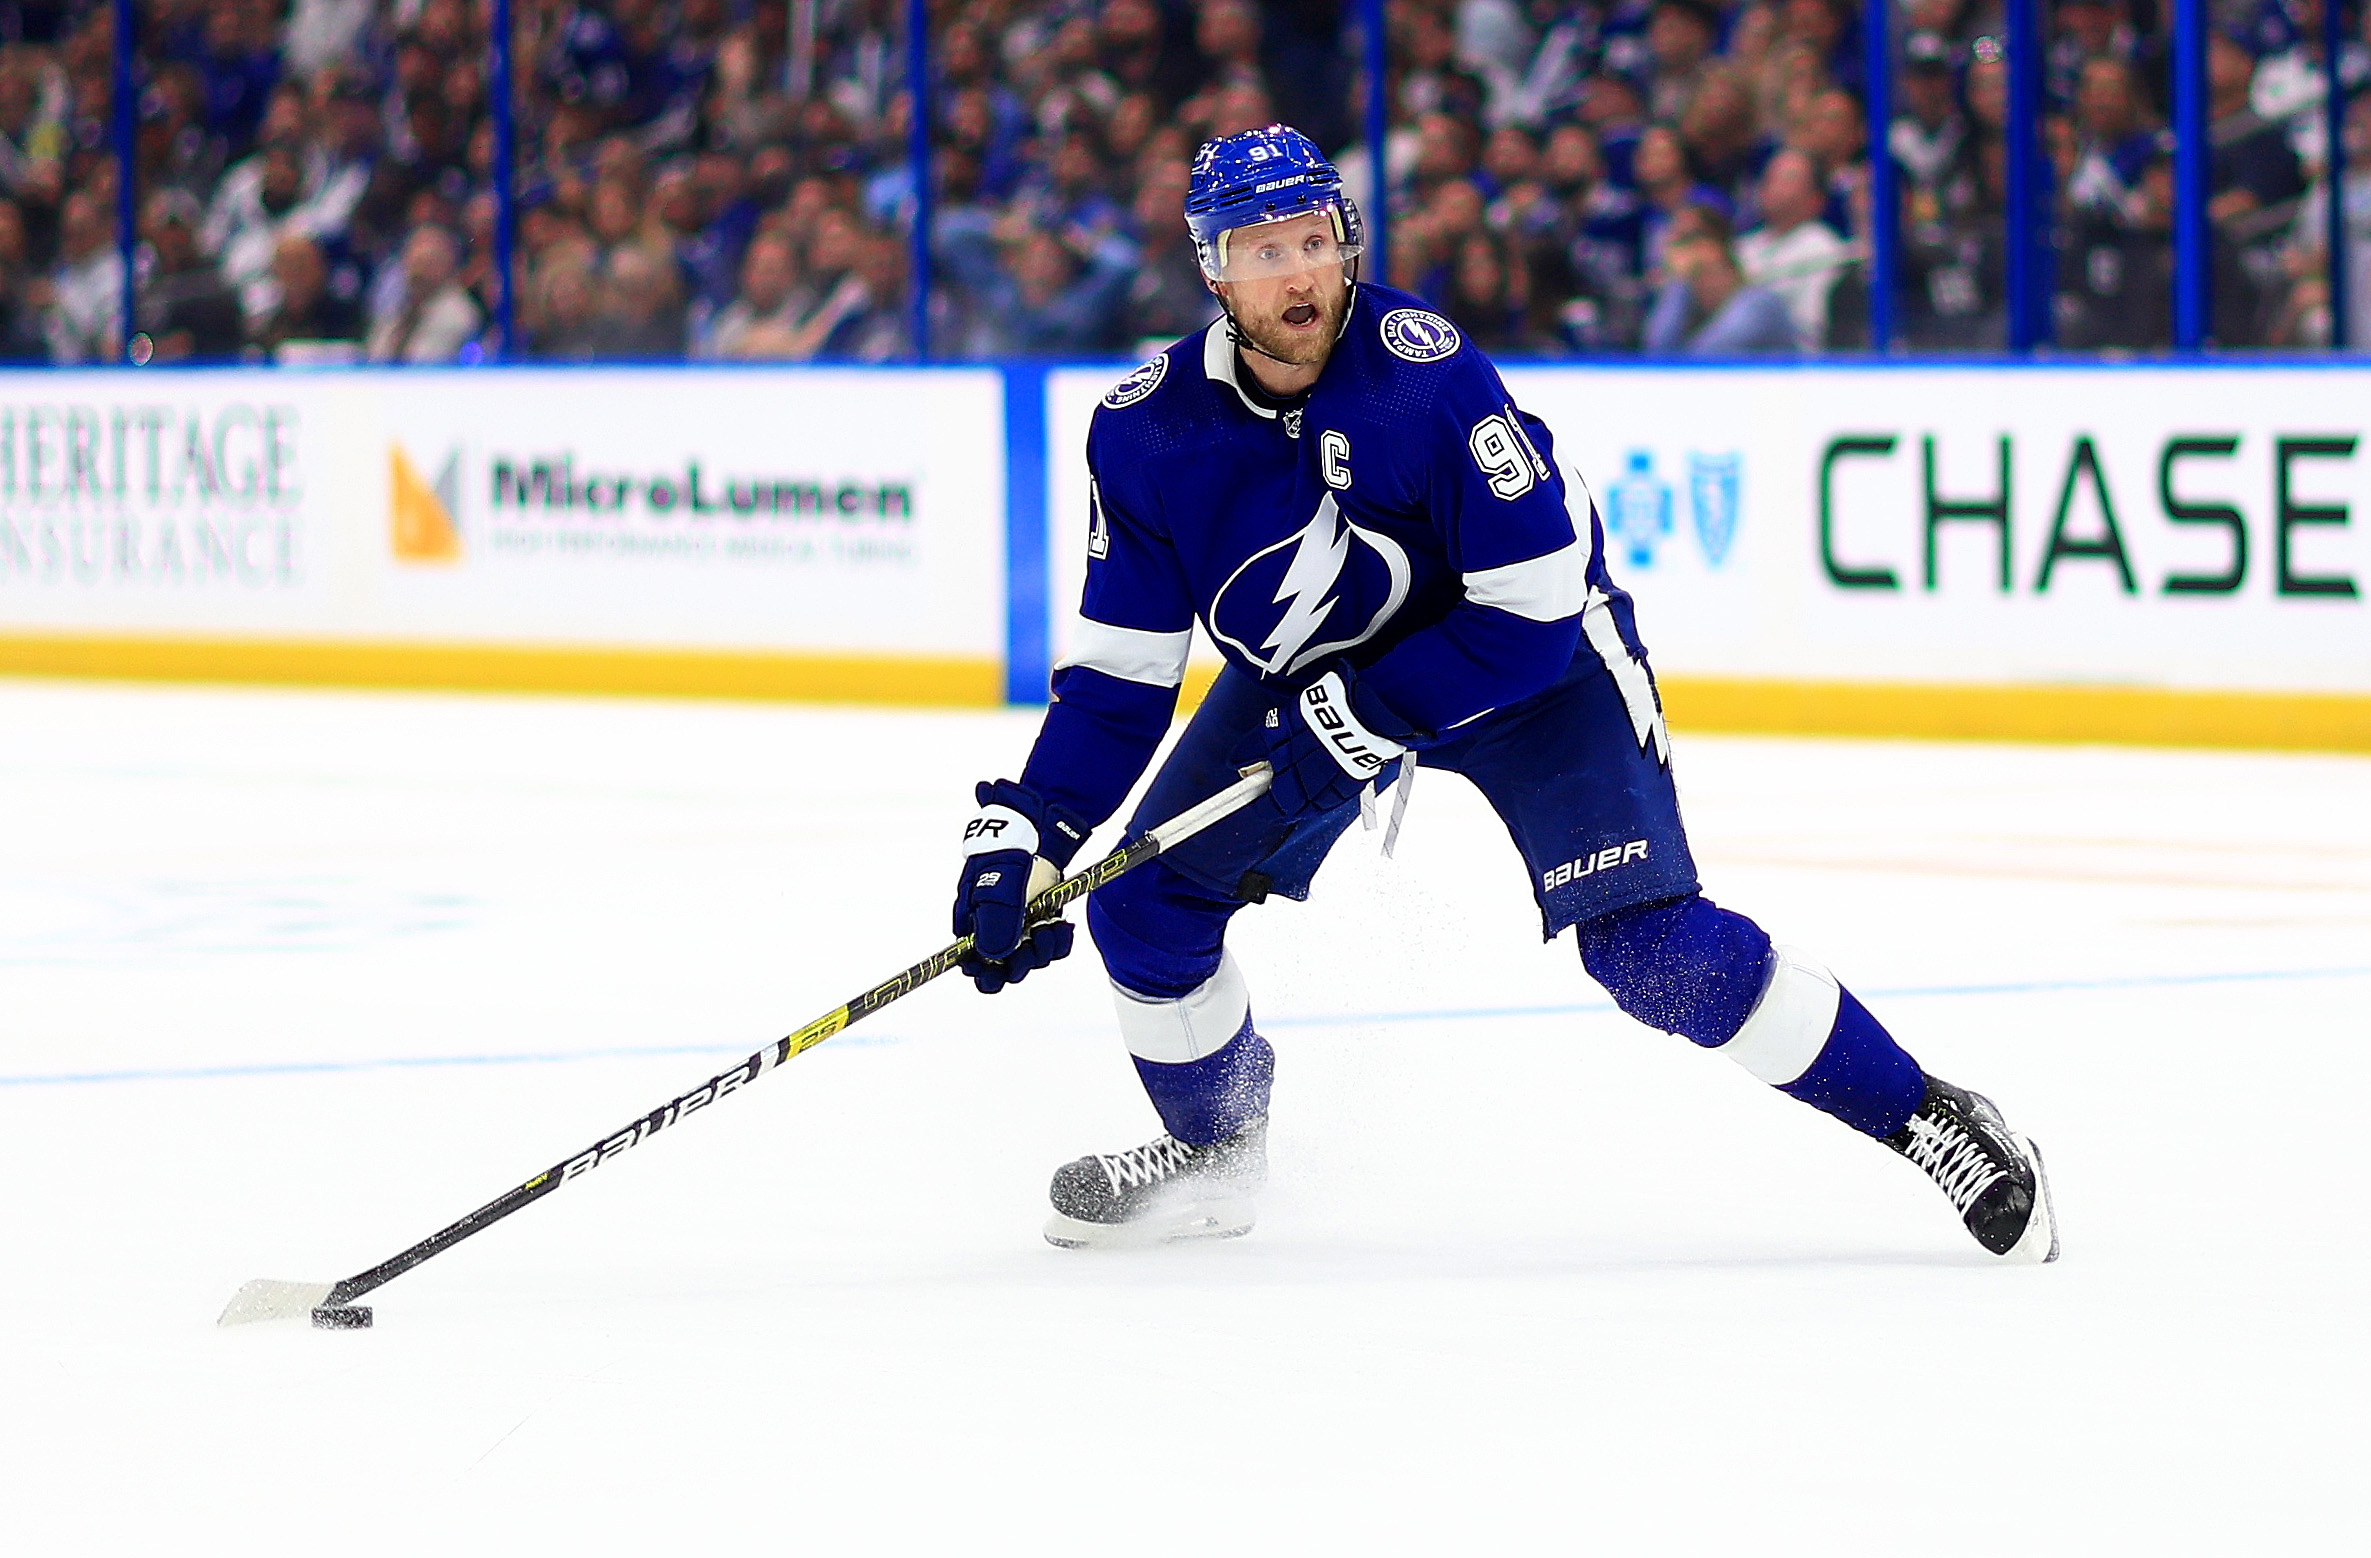 Steven Stamkos #91 of the Tampa Bay Lightning shoots in the second period during Game Five of the First Round of the 2022 Stanley Cup Playoffs against the Toronto Maple Leafs at Amalie Arena on May 12, 2022 in Tampa, Florida.